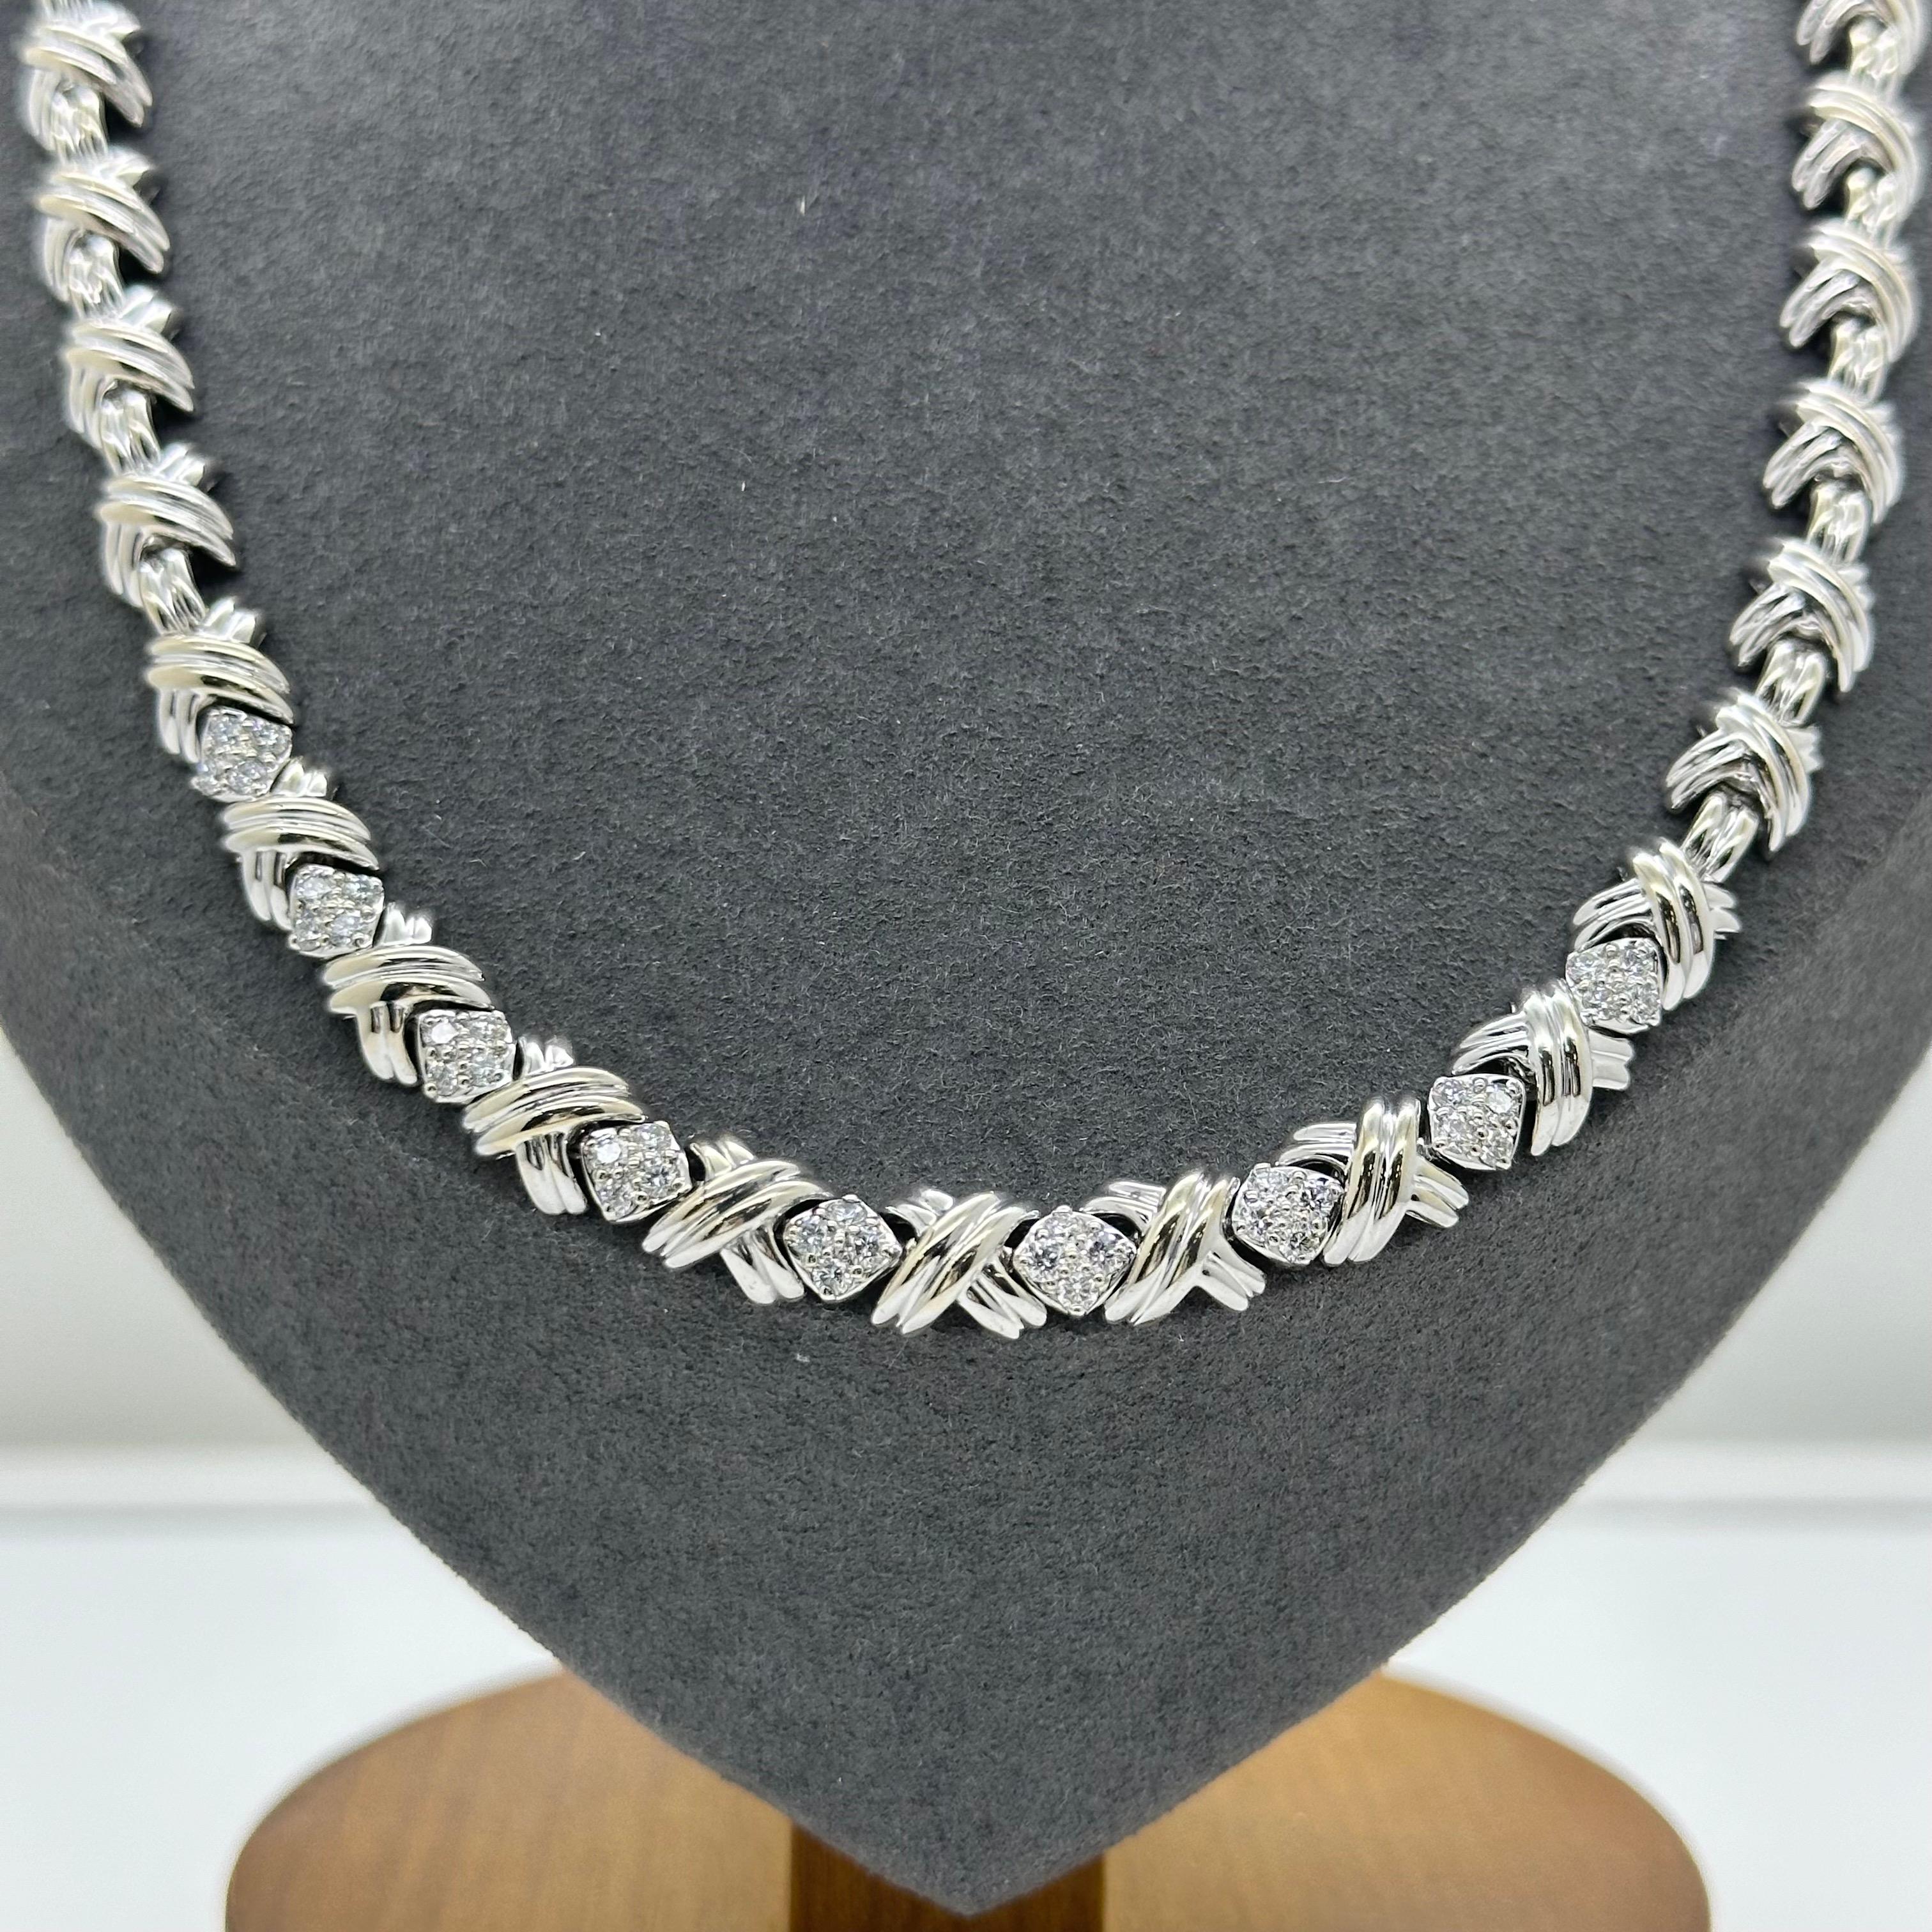 Tiffany & Co. Signature X Diamond Necklace in 18kt White Gold For Sale 3